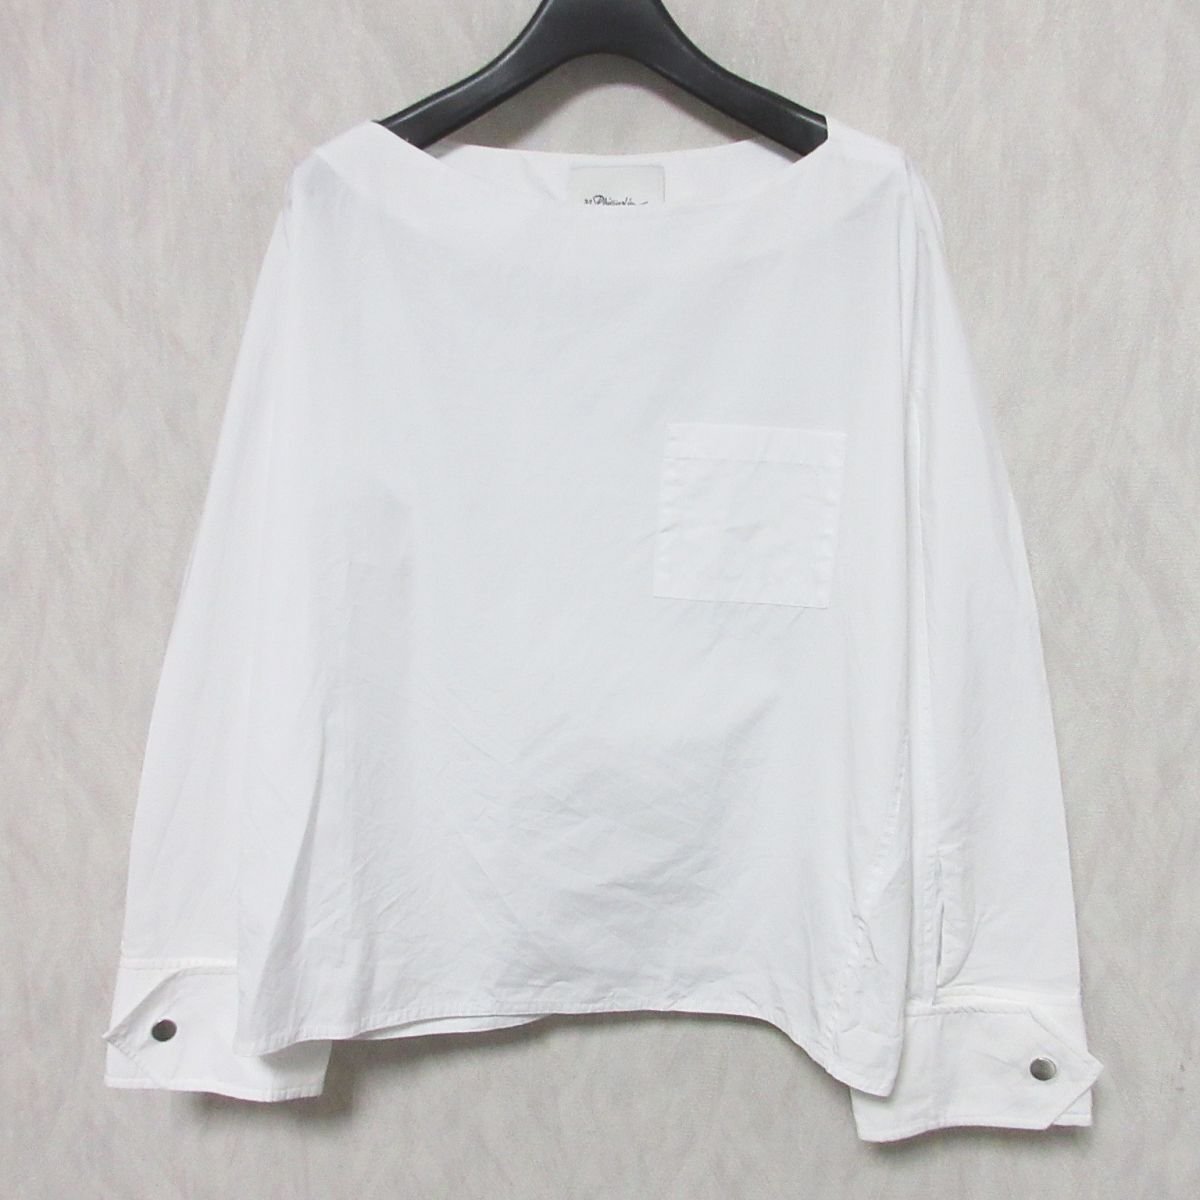  beautiful goods 20SS 3.1 Phillip lim 3.1 Philip rim long sleeve boat neck pull over cut and sewn blouse 0 white *